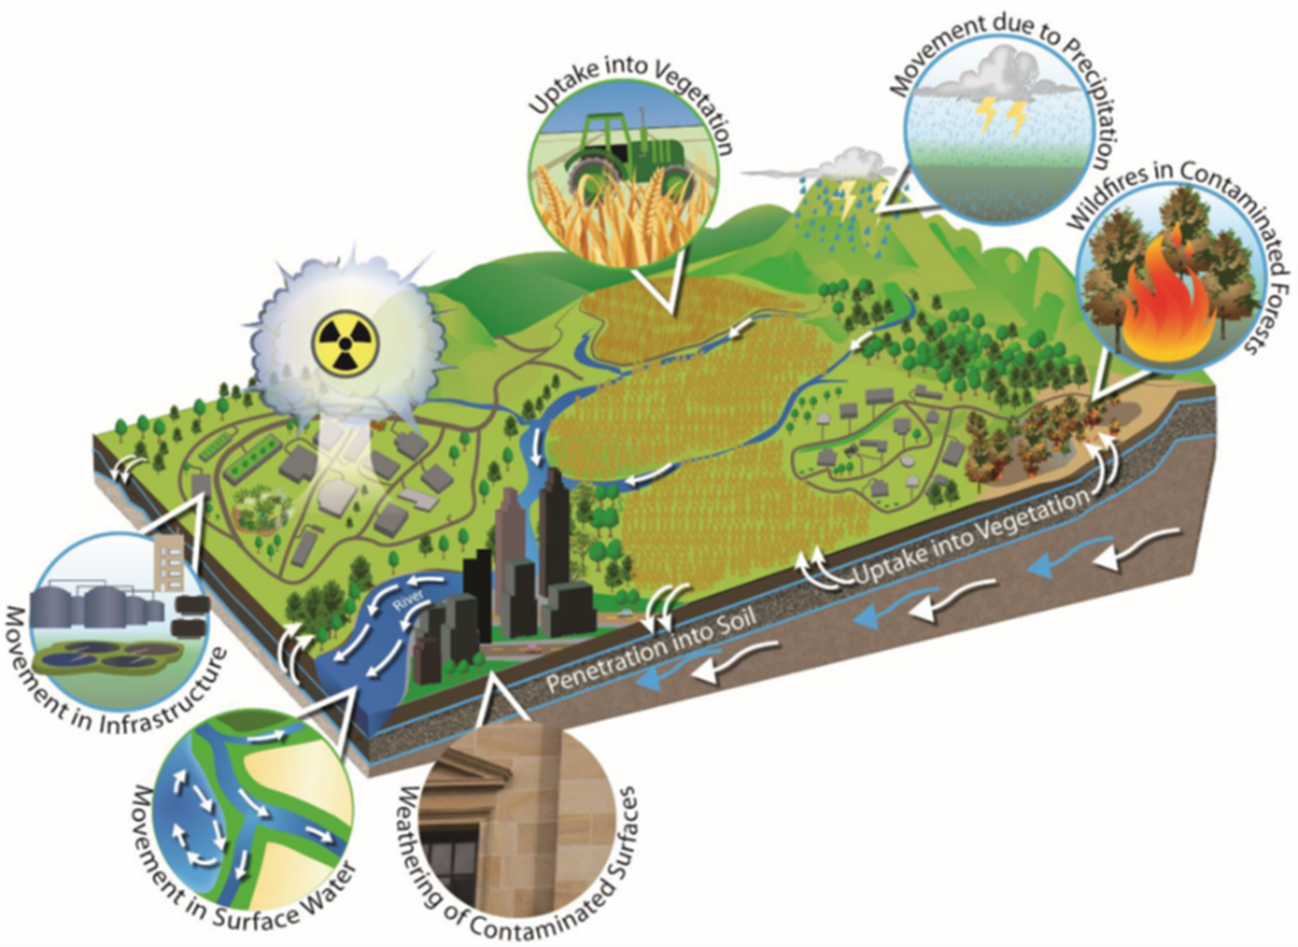 Radiological contaminants can travel throughout the built and natural environment